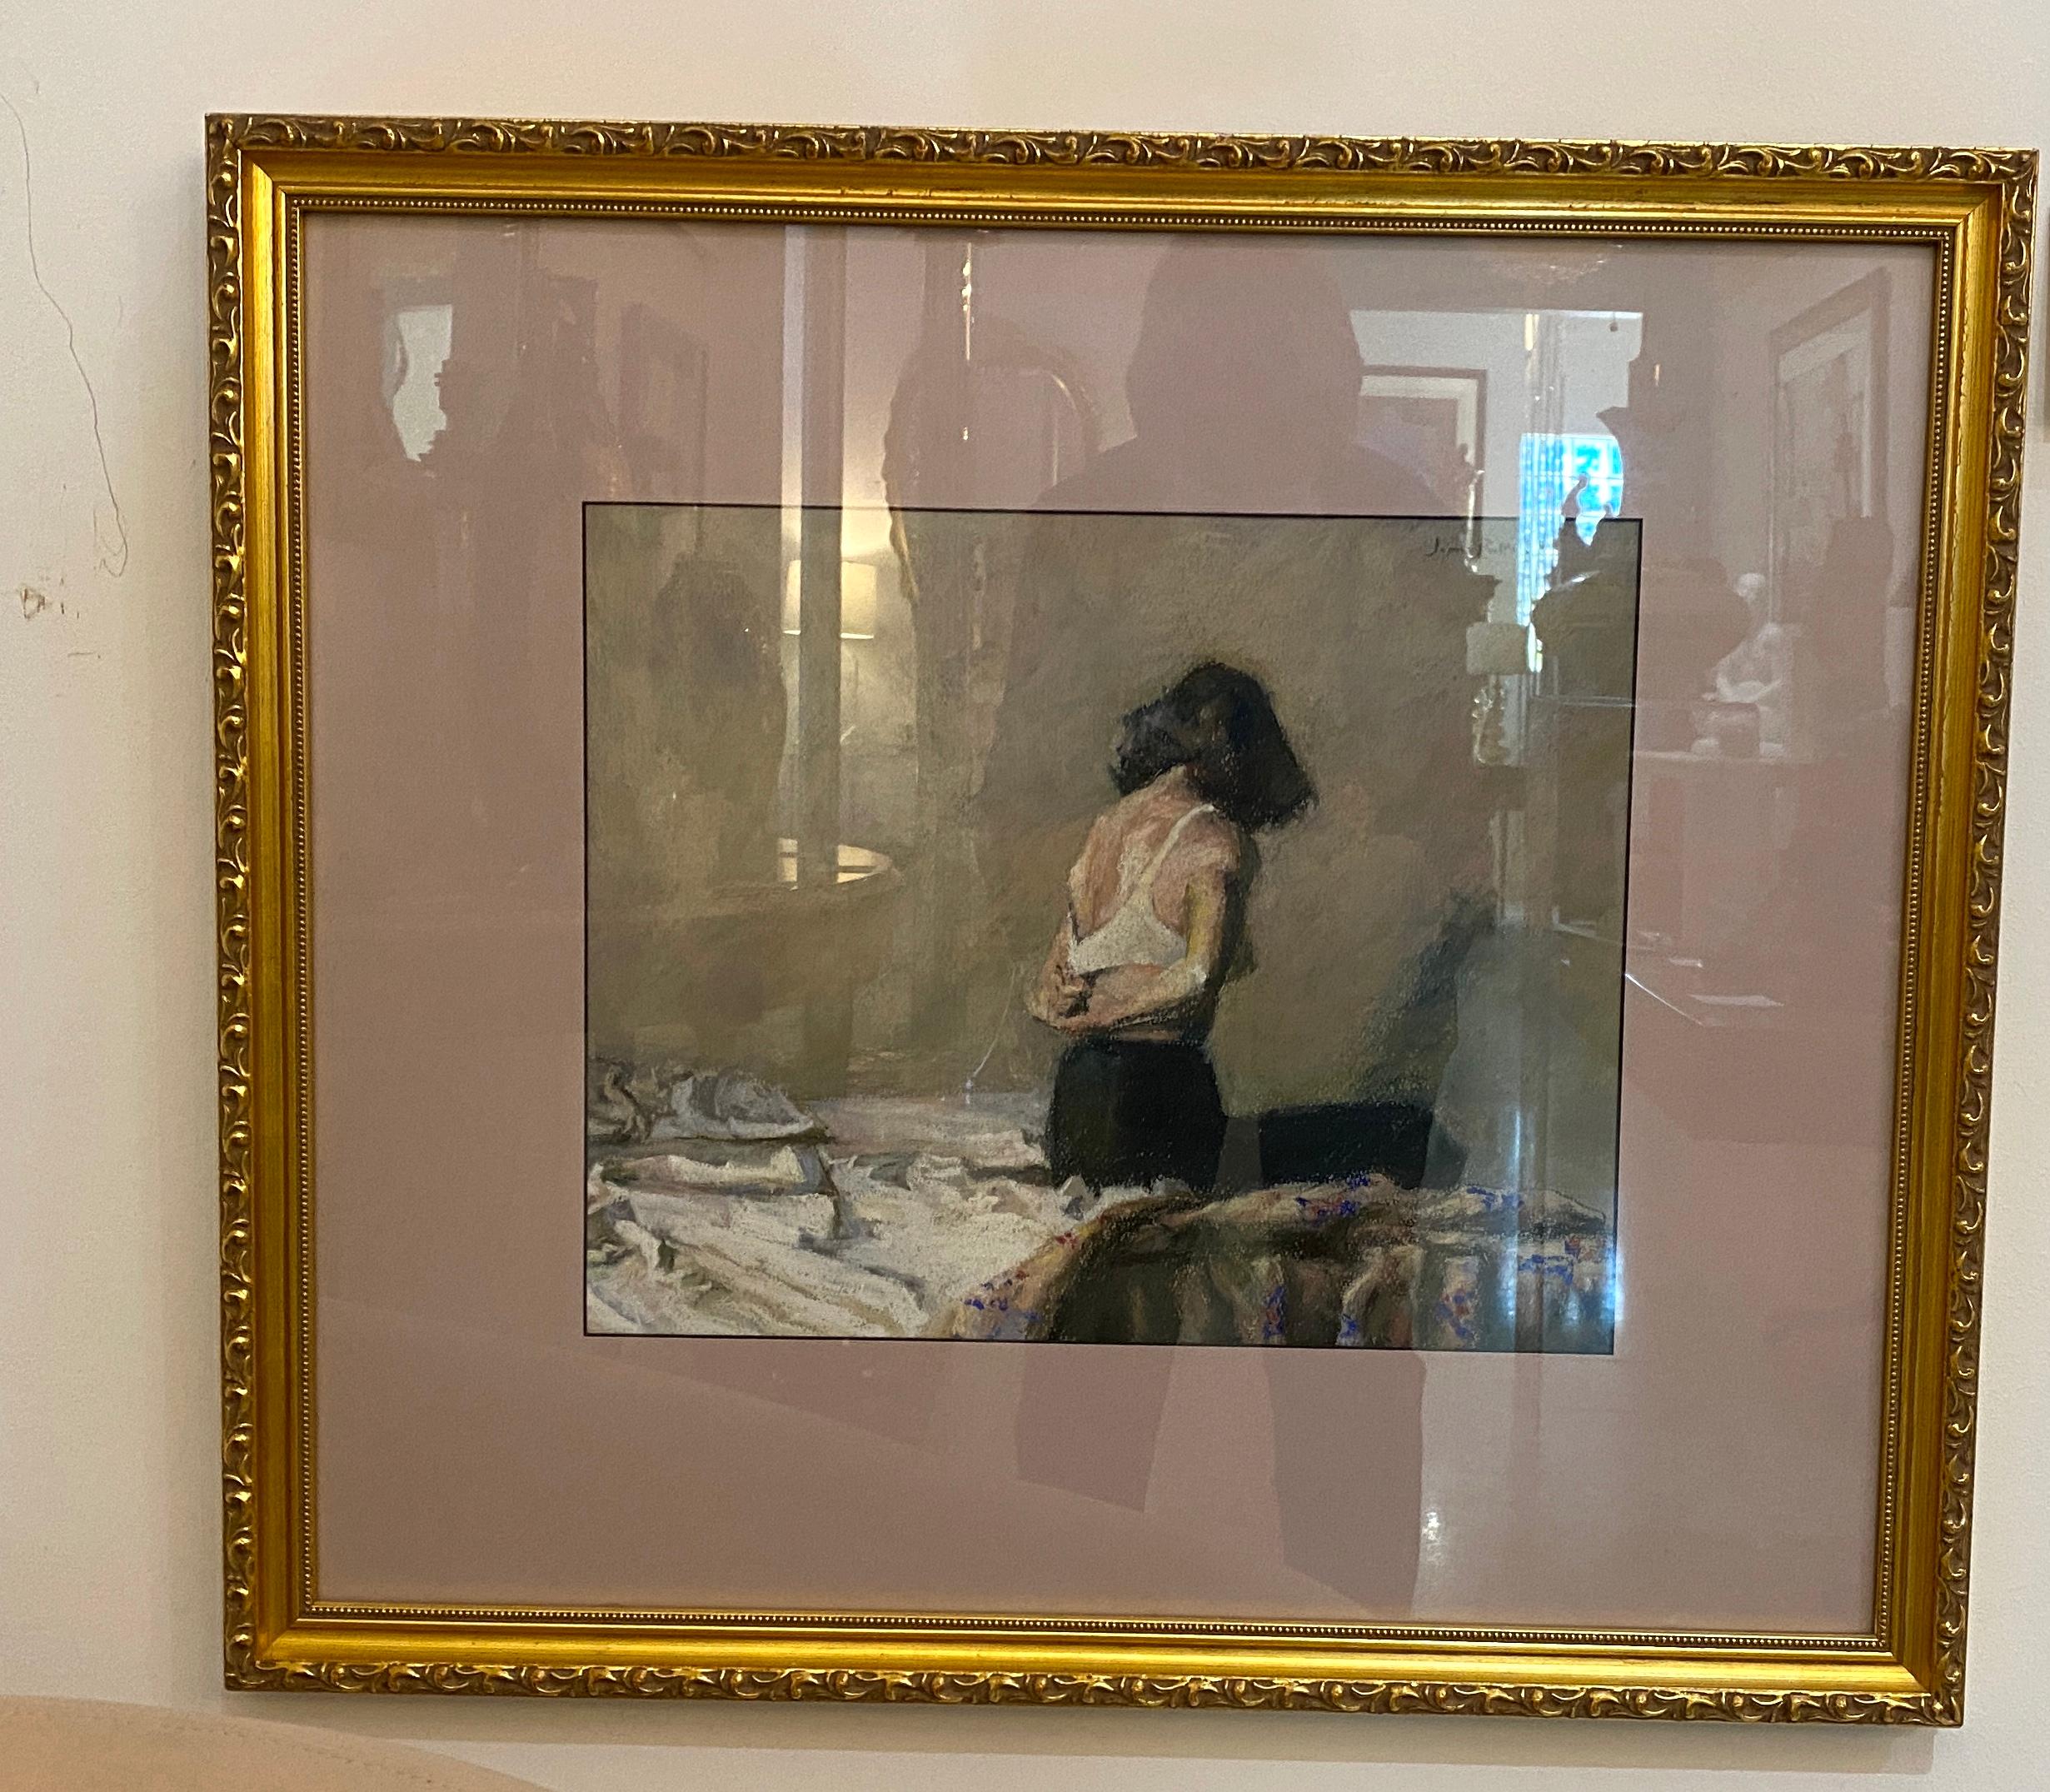 This pastel on paper is quite alluring with its subject matter and soft use of colors as the artist has captured a quiet, personal moment in this woman's life. 

Note: The piece is signed in the upper right corner but, we're not able to decipher the